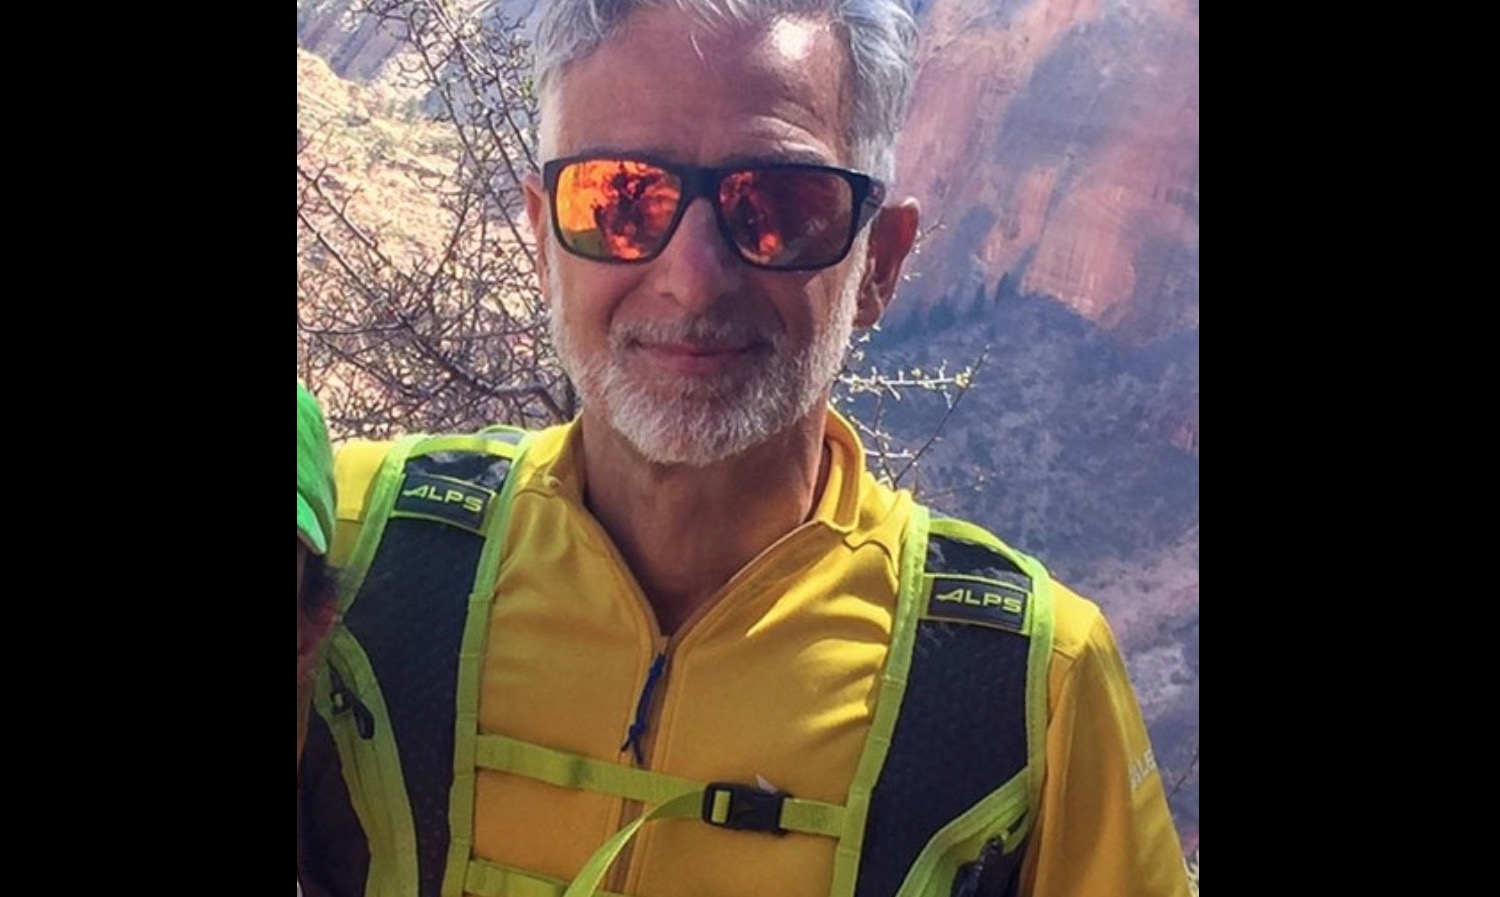 A photo of Zalokar oout out by the National Parks Service as they sought information about him.